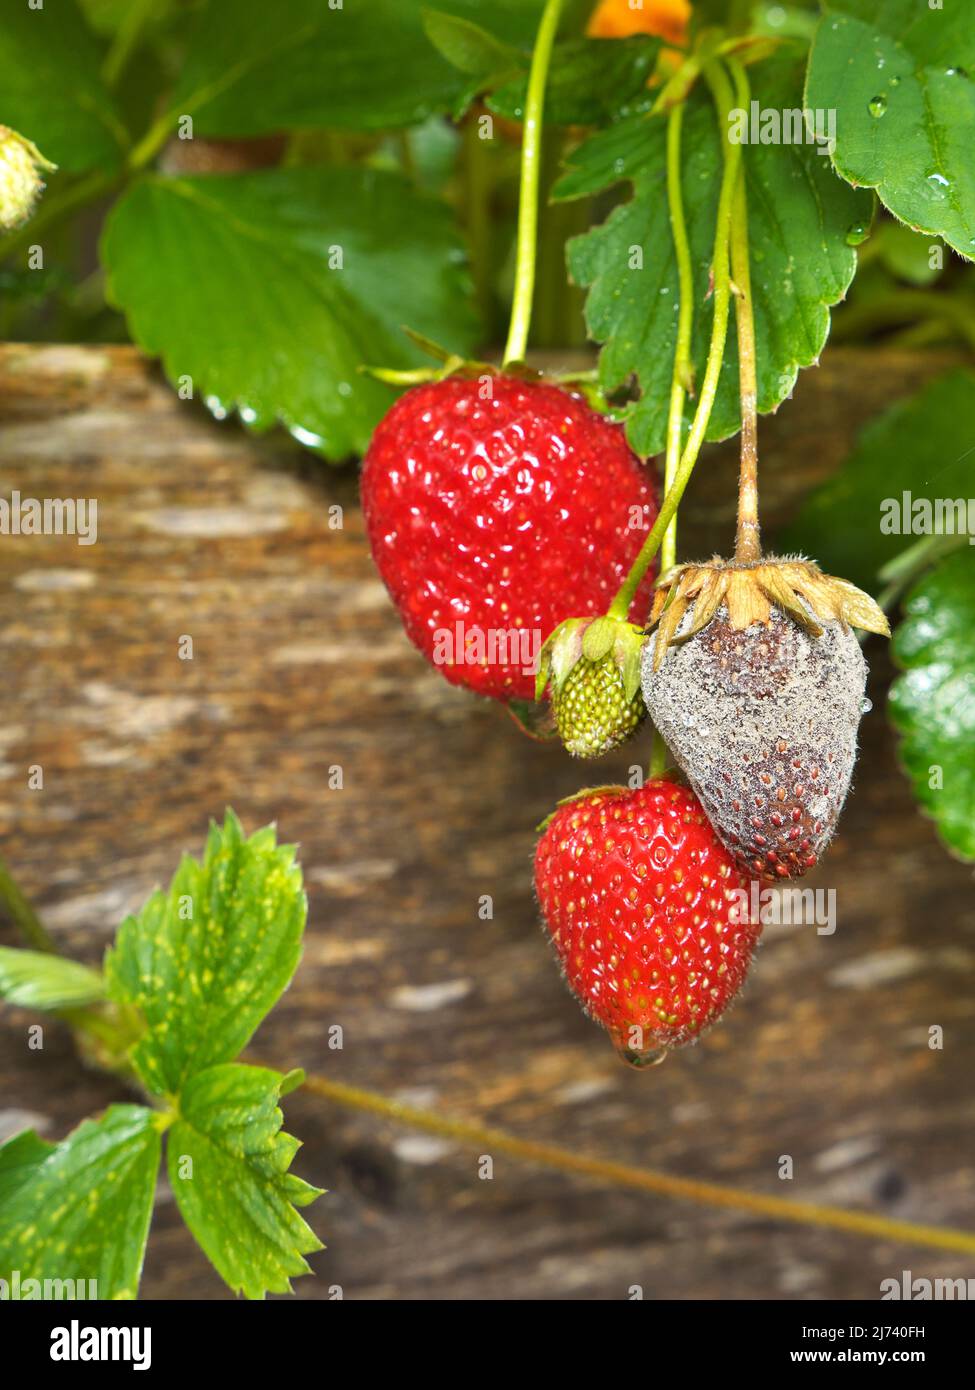 photo shows a close up of Botrytis Fruit Rot or Gray Mold of strawberries Stock Photo